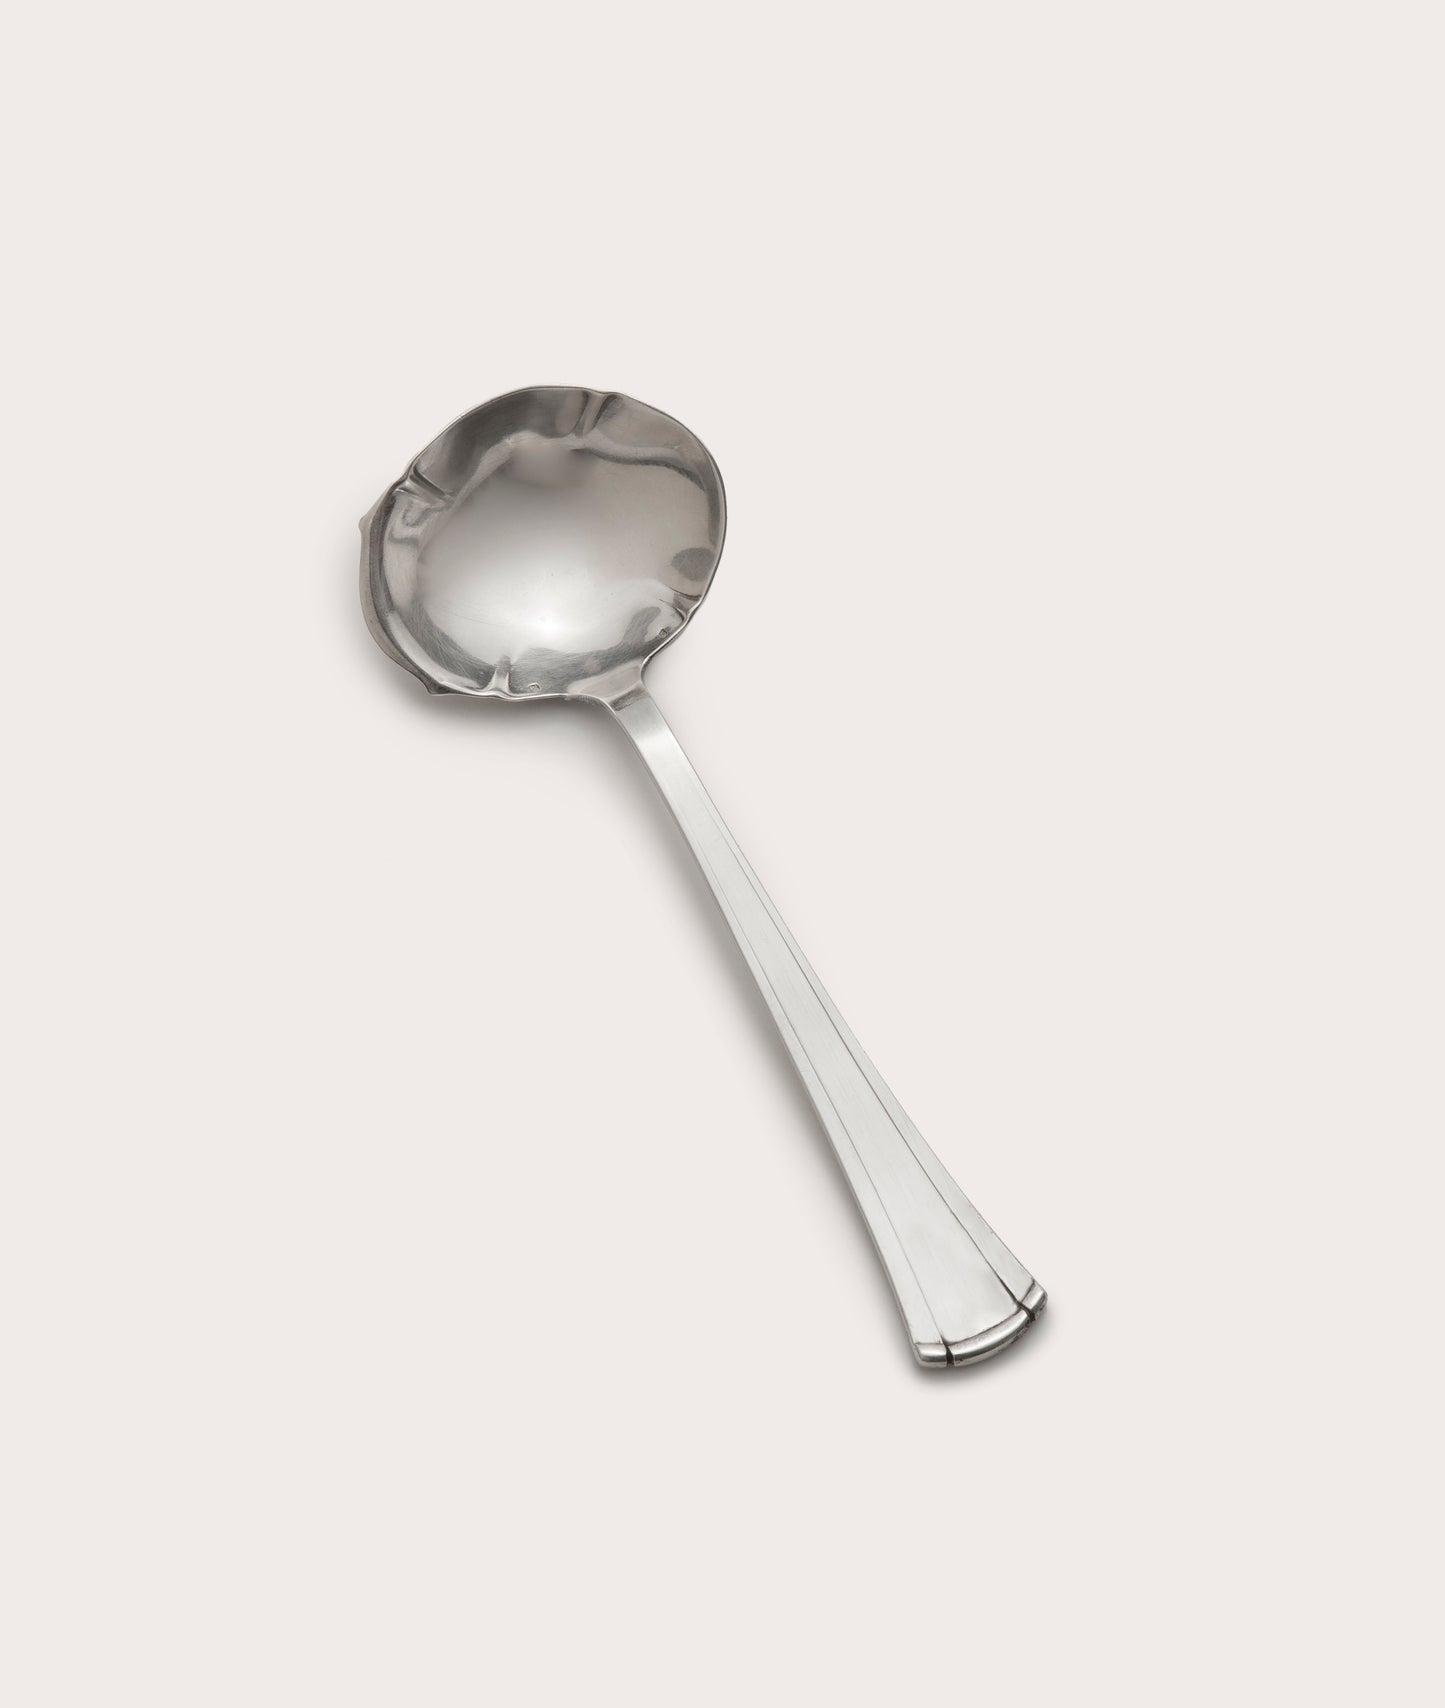 Serving Spoon, Rounded